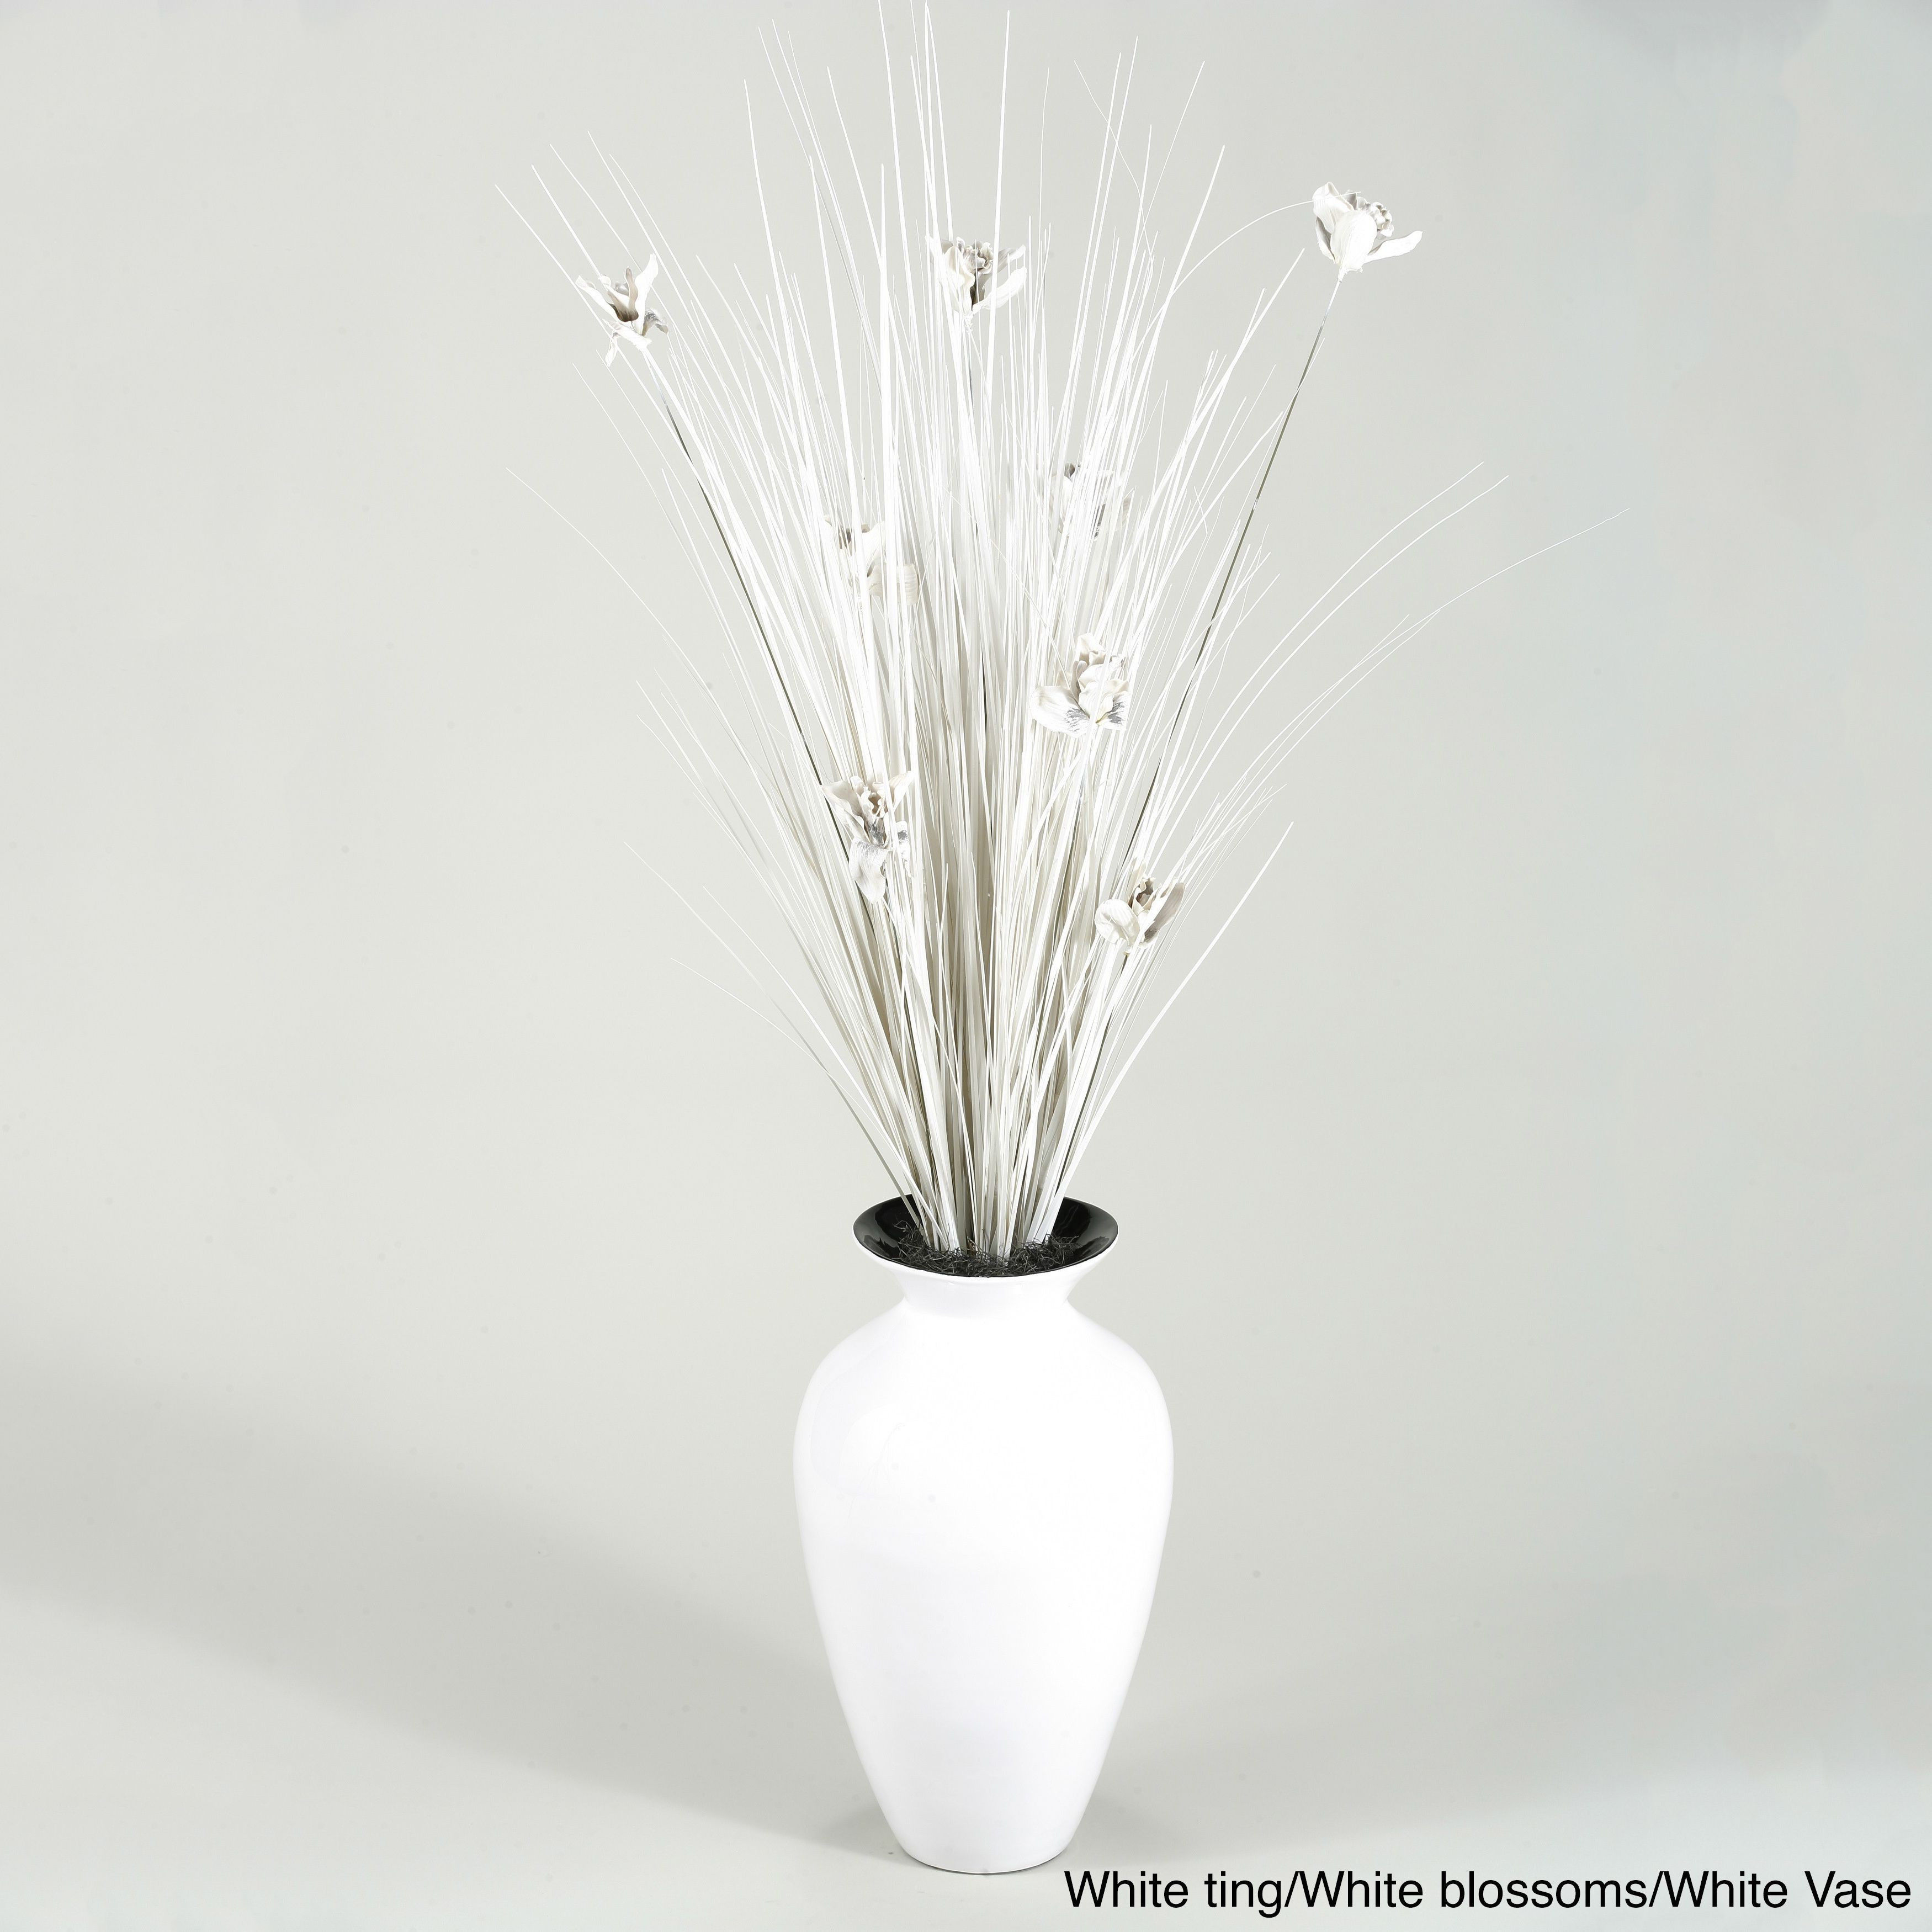 20 Famous Bamboo Vase Ideas 2024 free download bamboo vase ideas of blossoms in bamboo green vase black ting with red blossoms in inside dw silks blossoms in bamboo green vase white ting with white blossoms in white vase